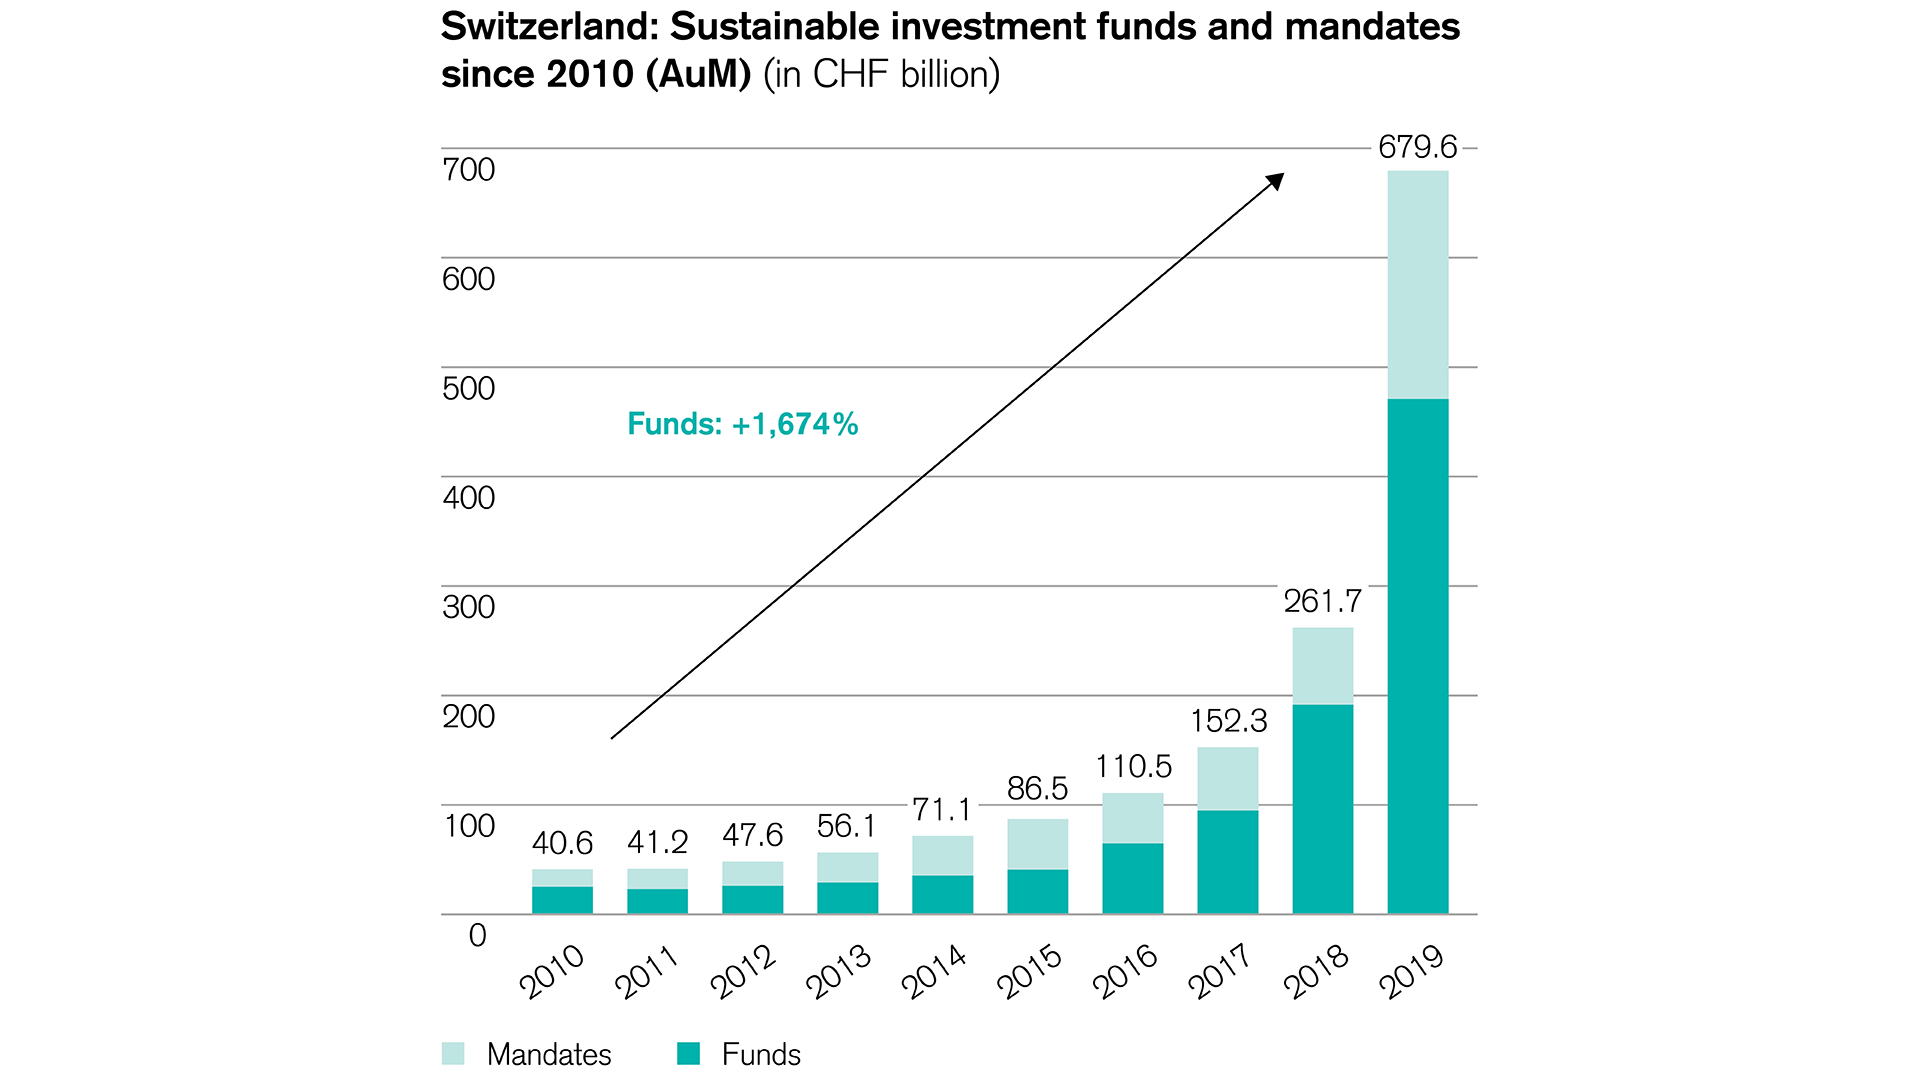 Sustainability funds gained popularity over past decade 